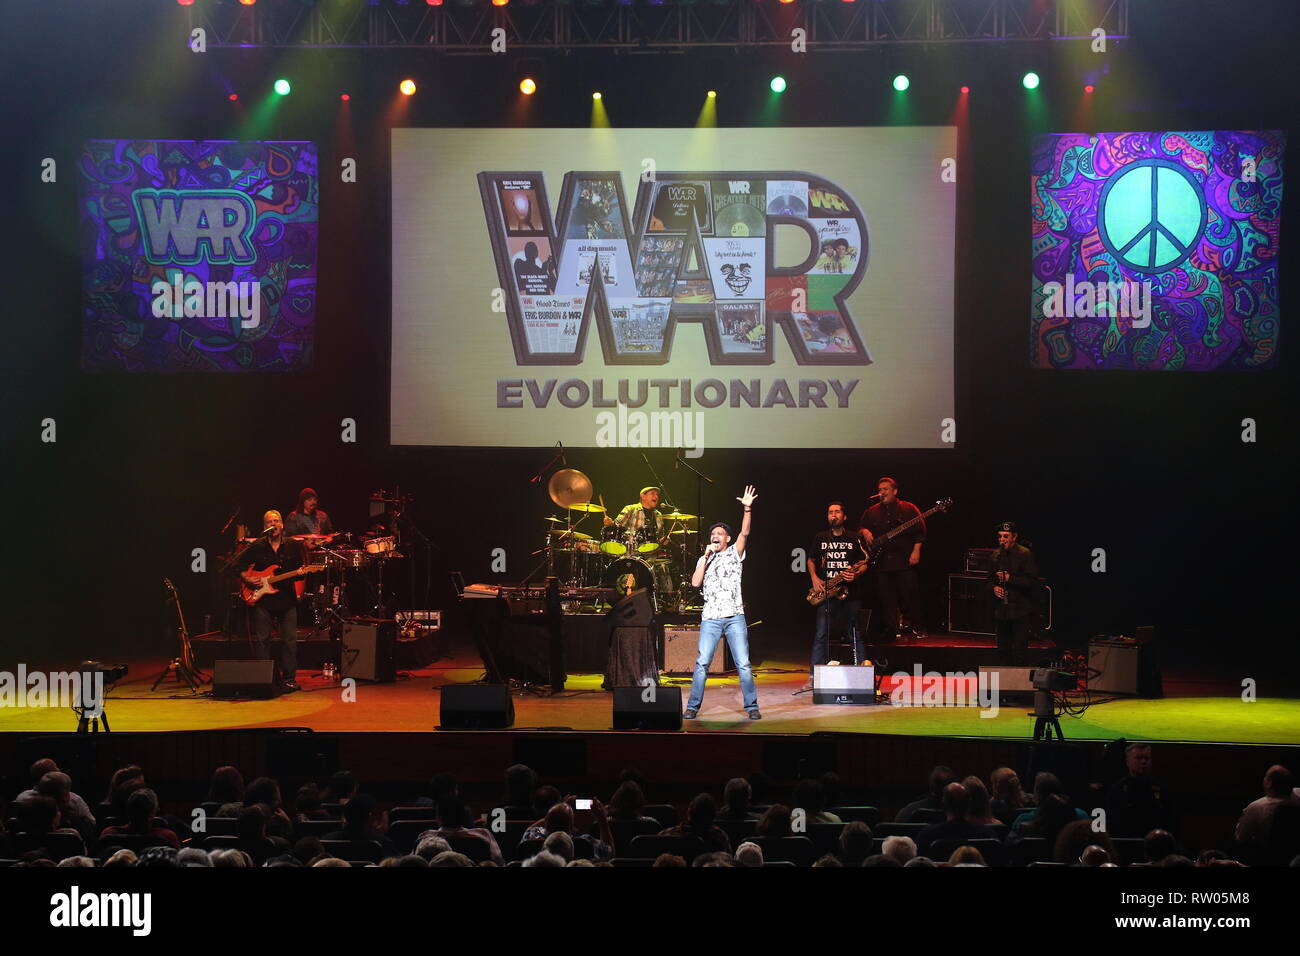 War is shown performing on star during a 'live' concert appearance. Stock Photo